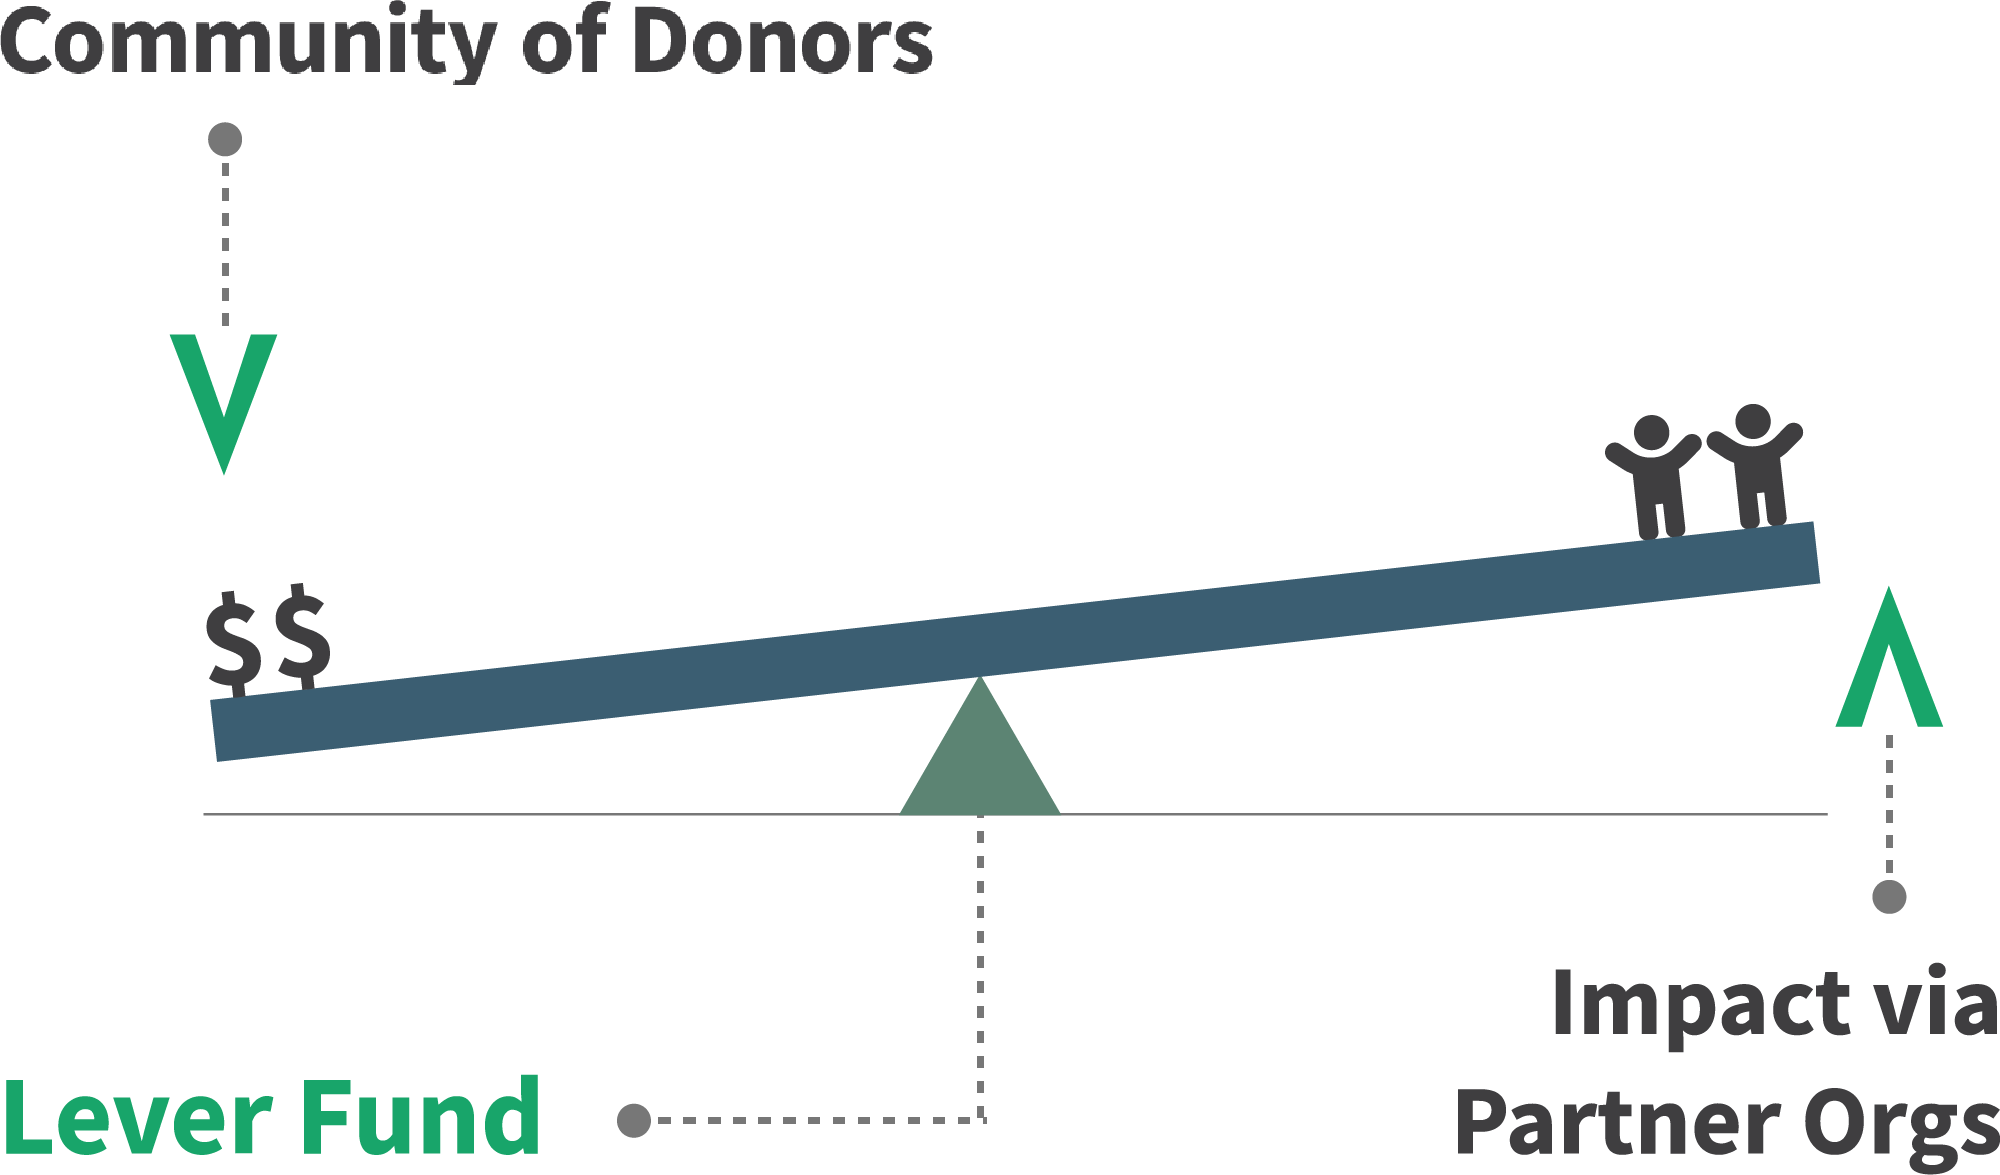 The impact of a community of donors via a partner organization and Lever Fund - stage 1